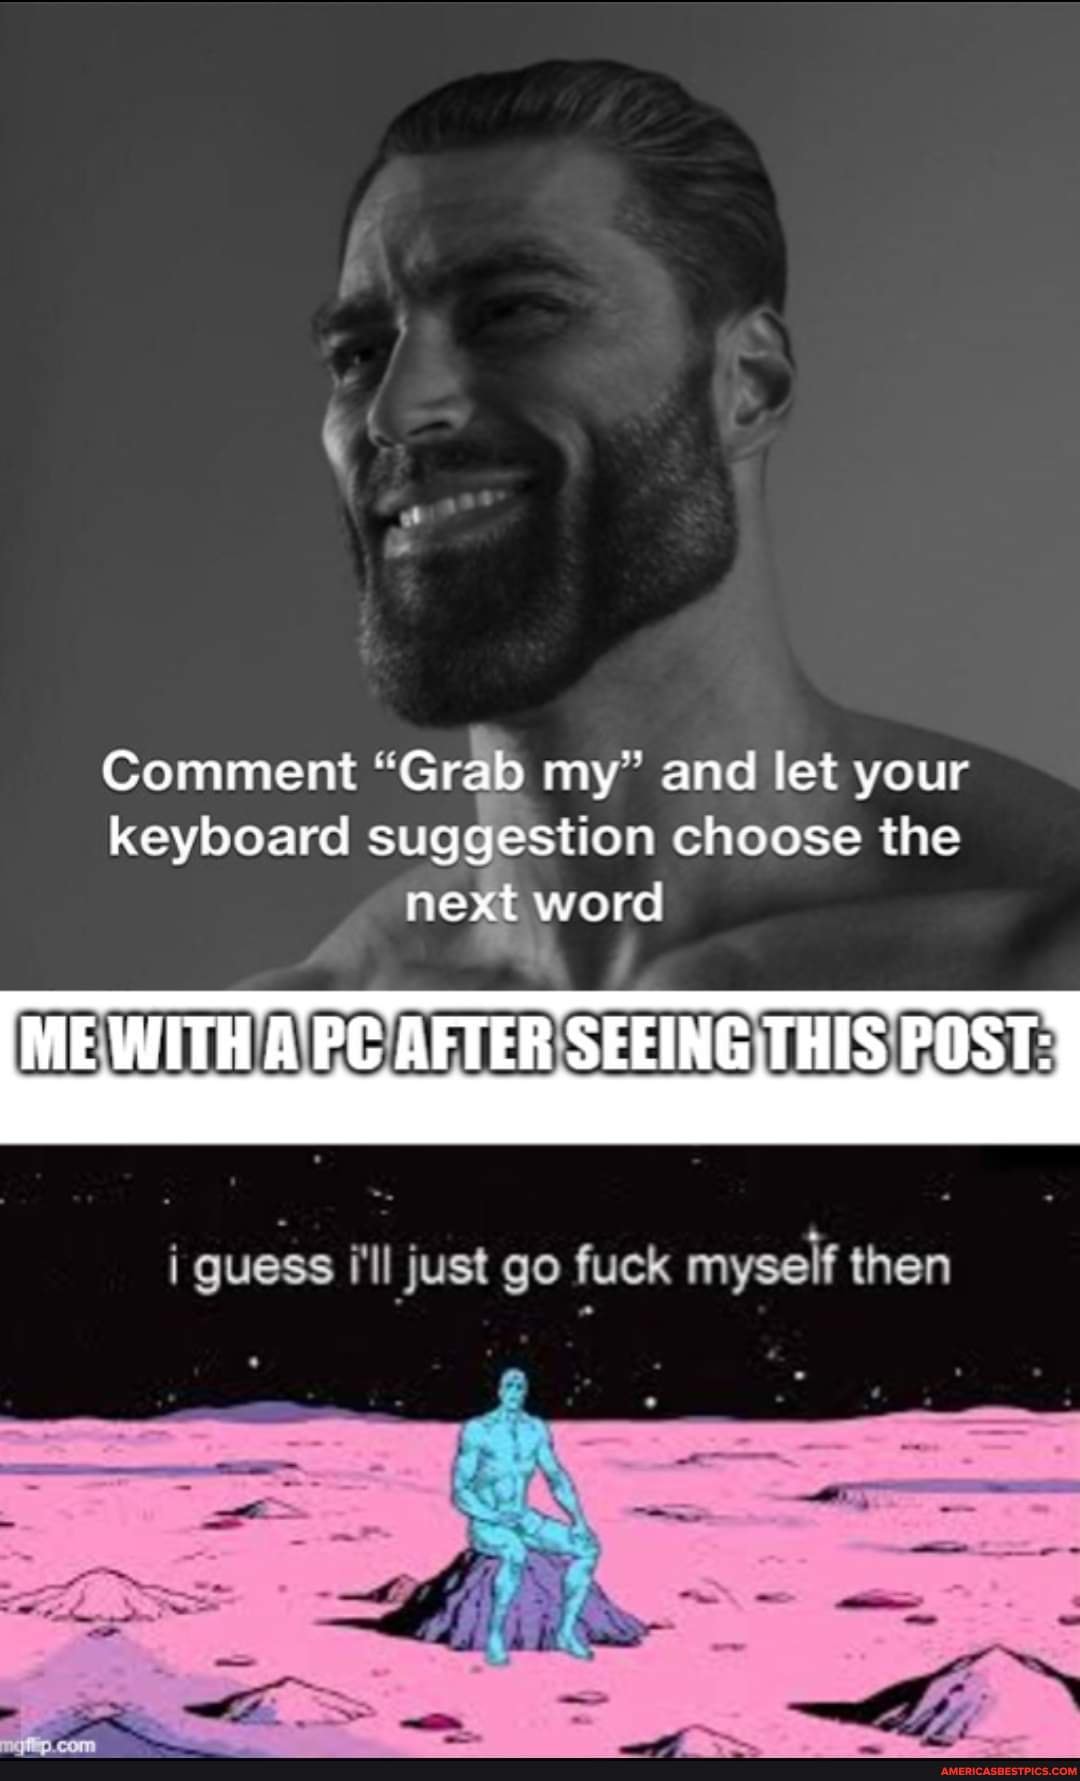 Comment "Grab my" and let your keyboard suggestion choose the next word ME WITH AFTER SEEING THIS POST: guess just go fuck myself - America's best pics and videos